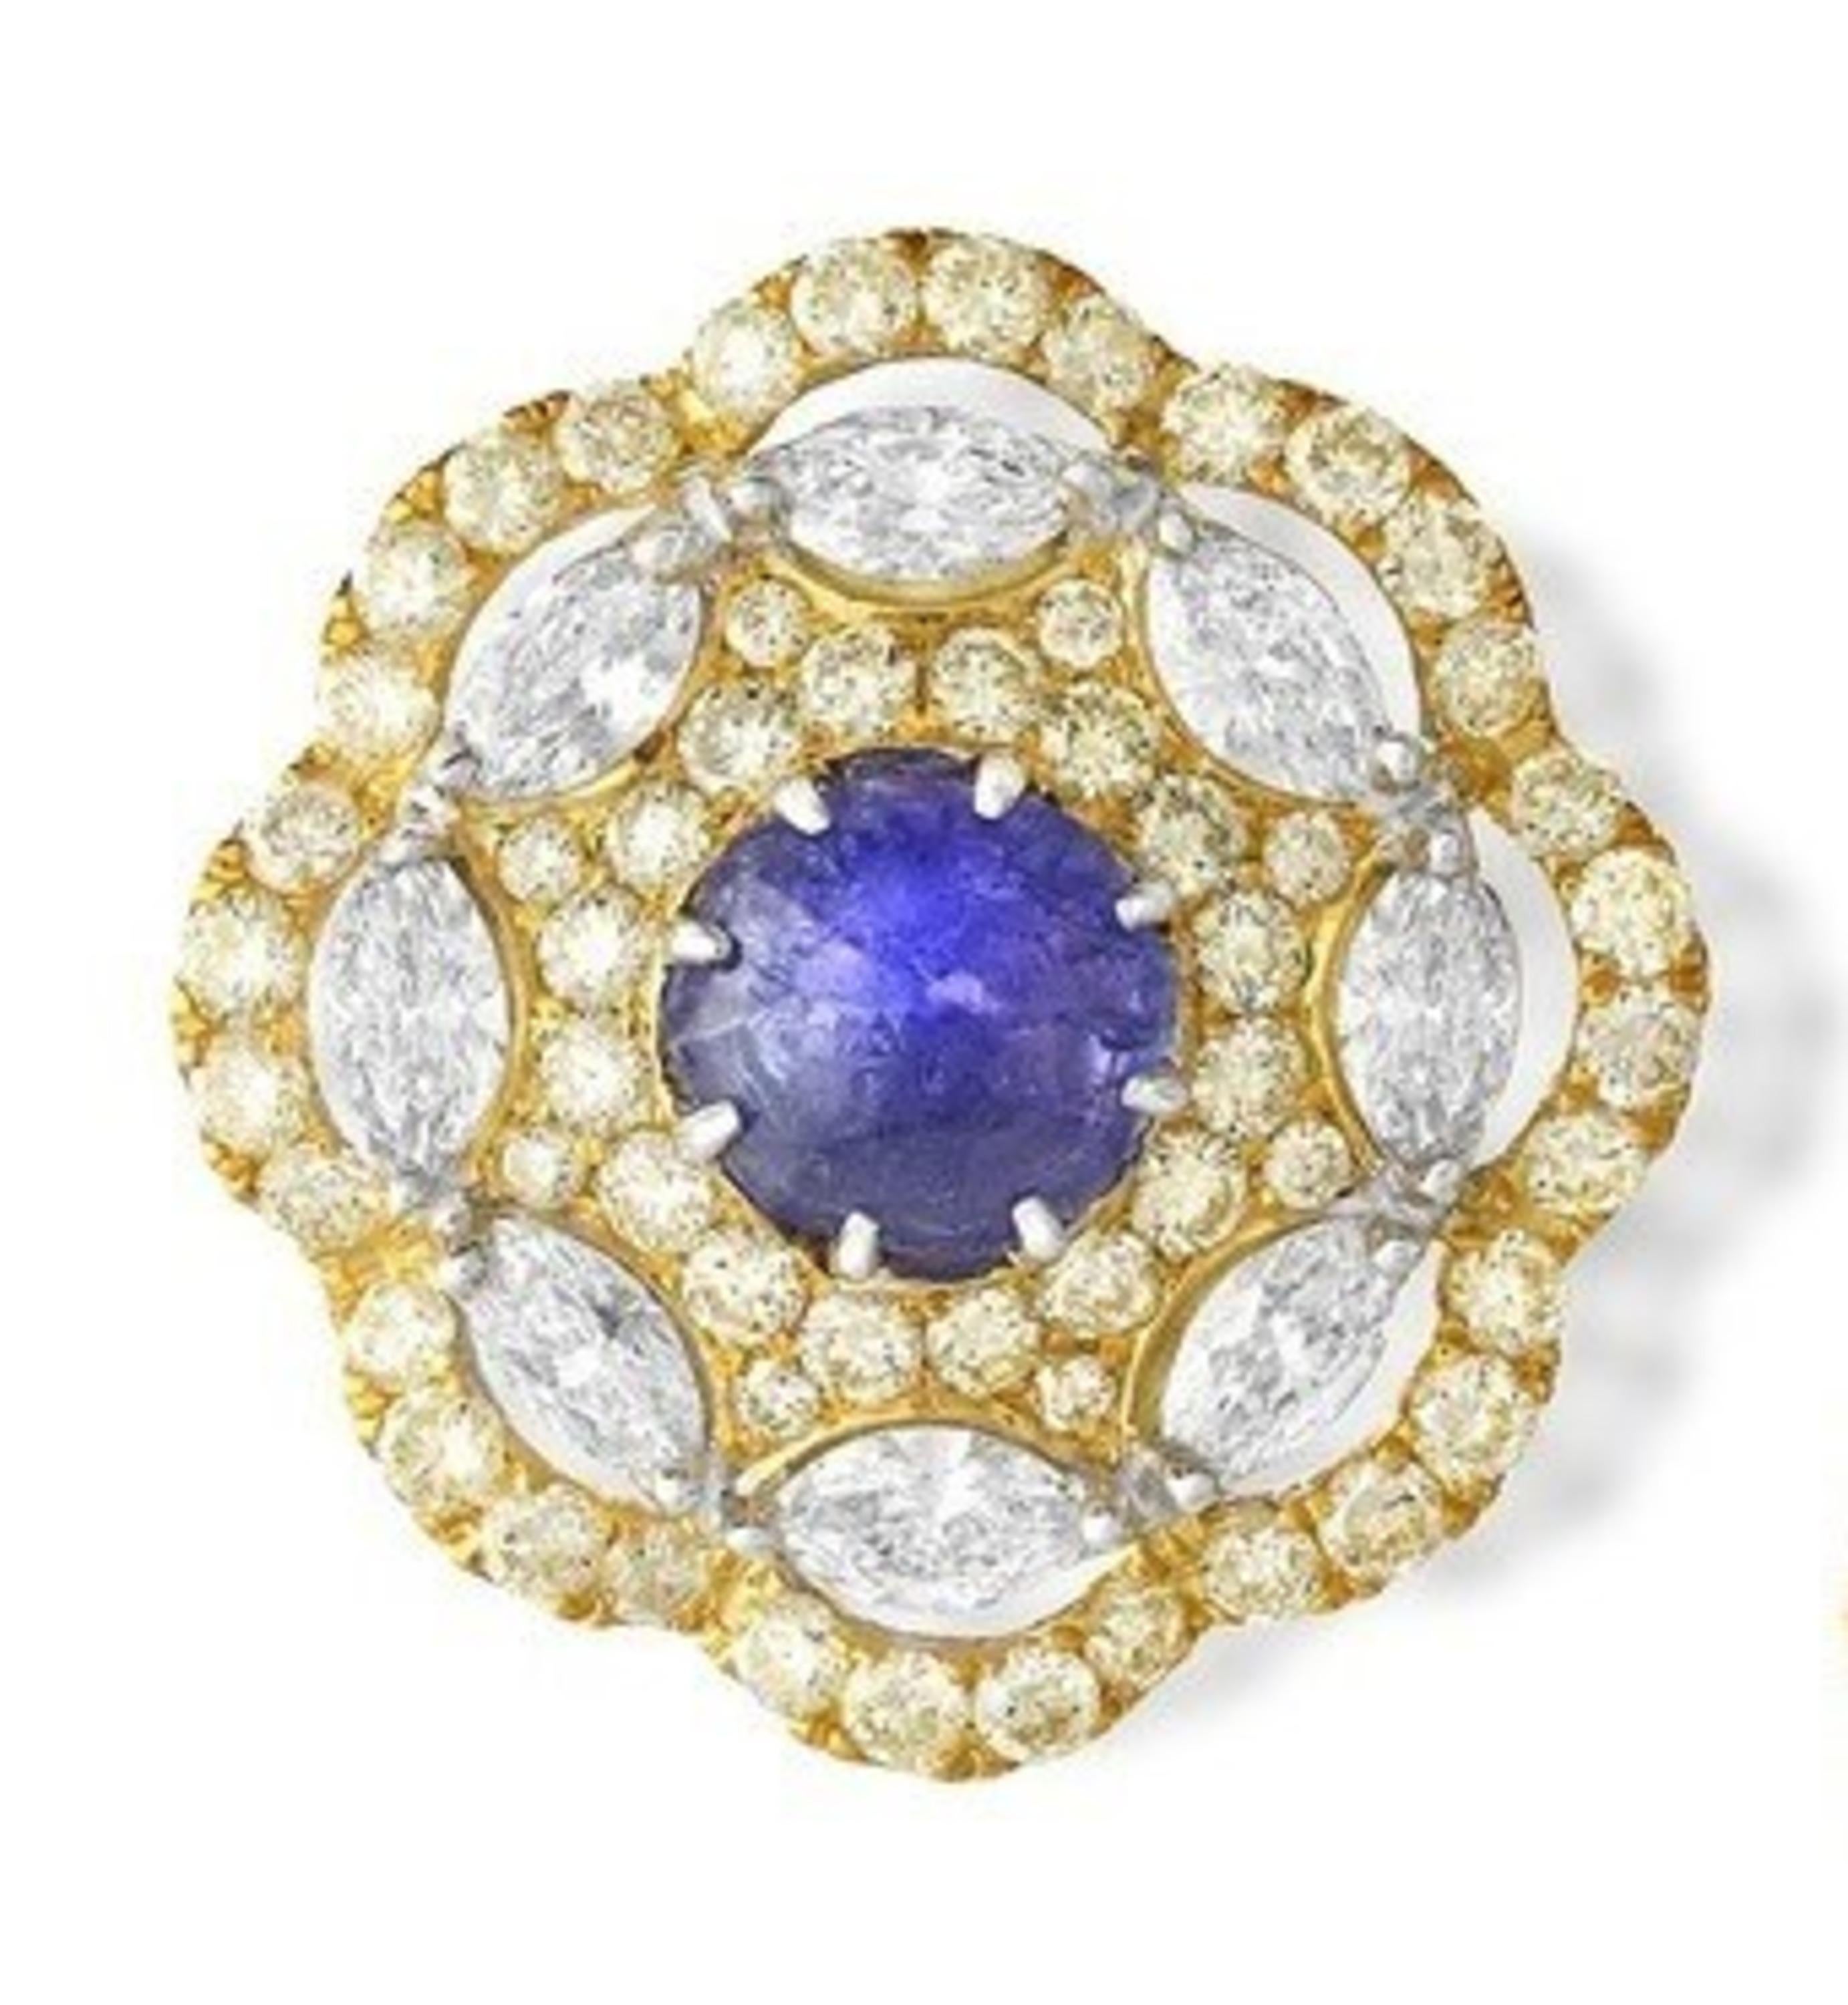 Simple line work with white & canary brilliant cut round & marquise shape diamonds  are set around the tanzanite cabochons. These ear studs are completed with a back plate which adds to the detail in craftsmanship. 
These ear studs are classic &